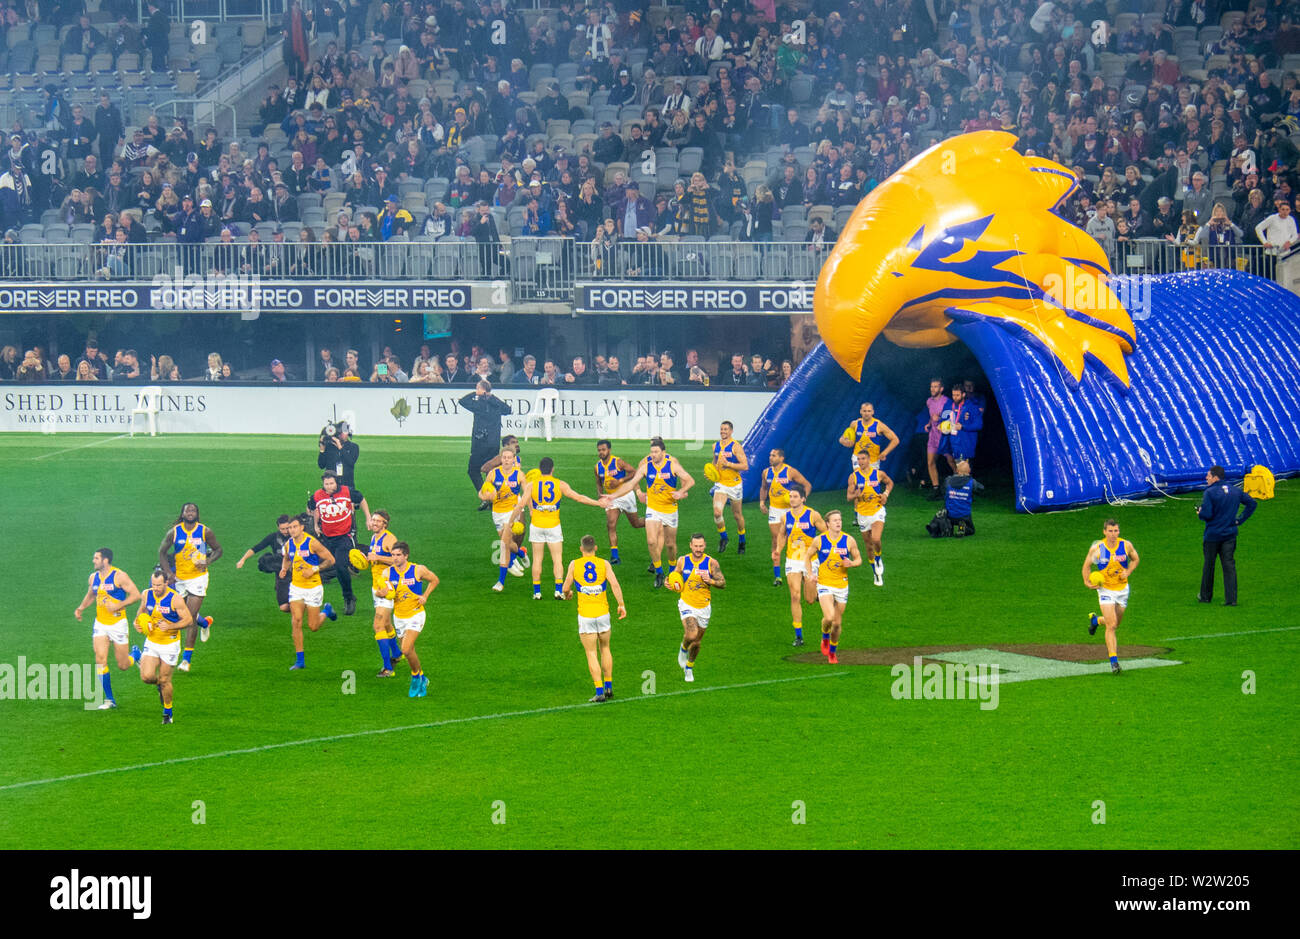 West Coast Eagles football players running onto the field in Western Derby AFL game at Optus Stadium Perth Western Australia. Stock Photo